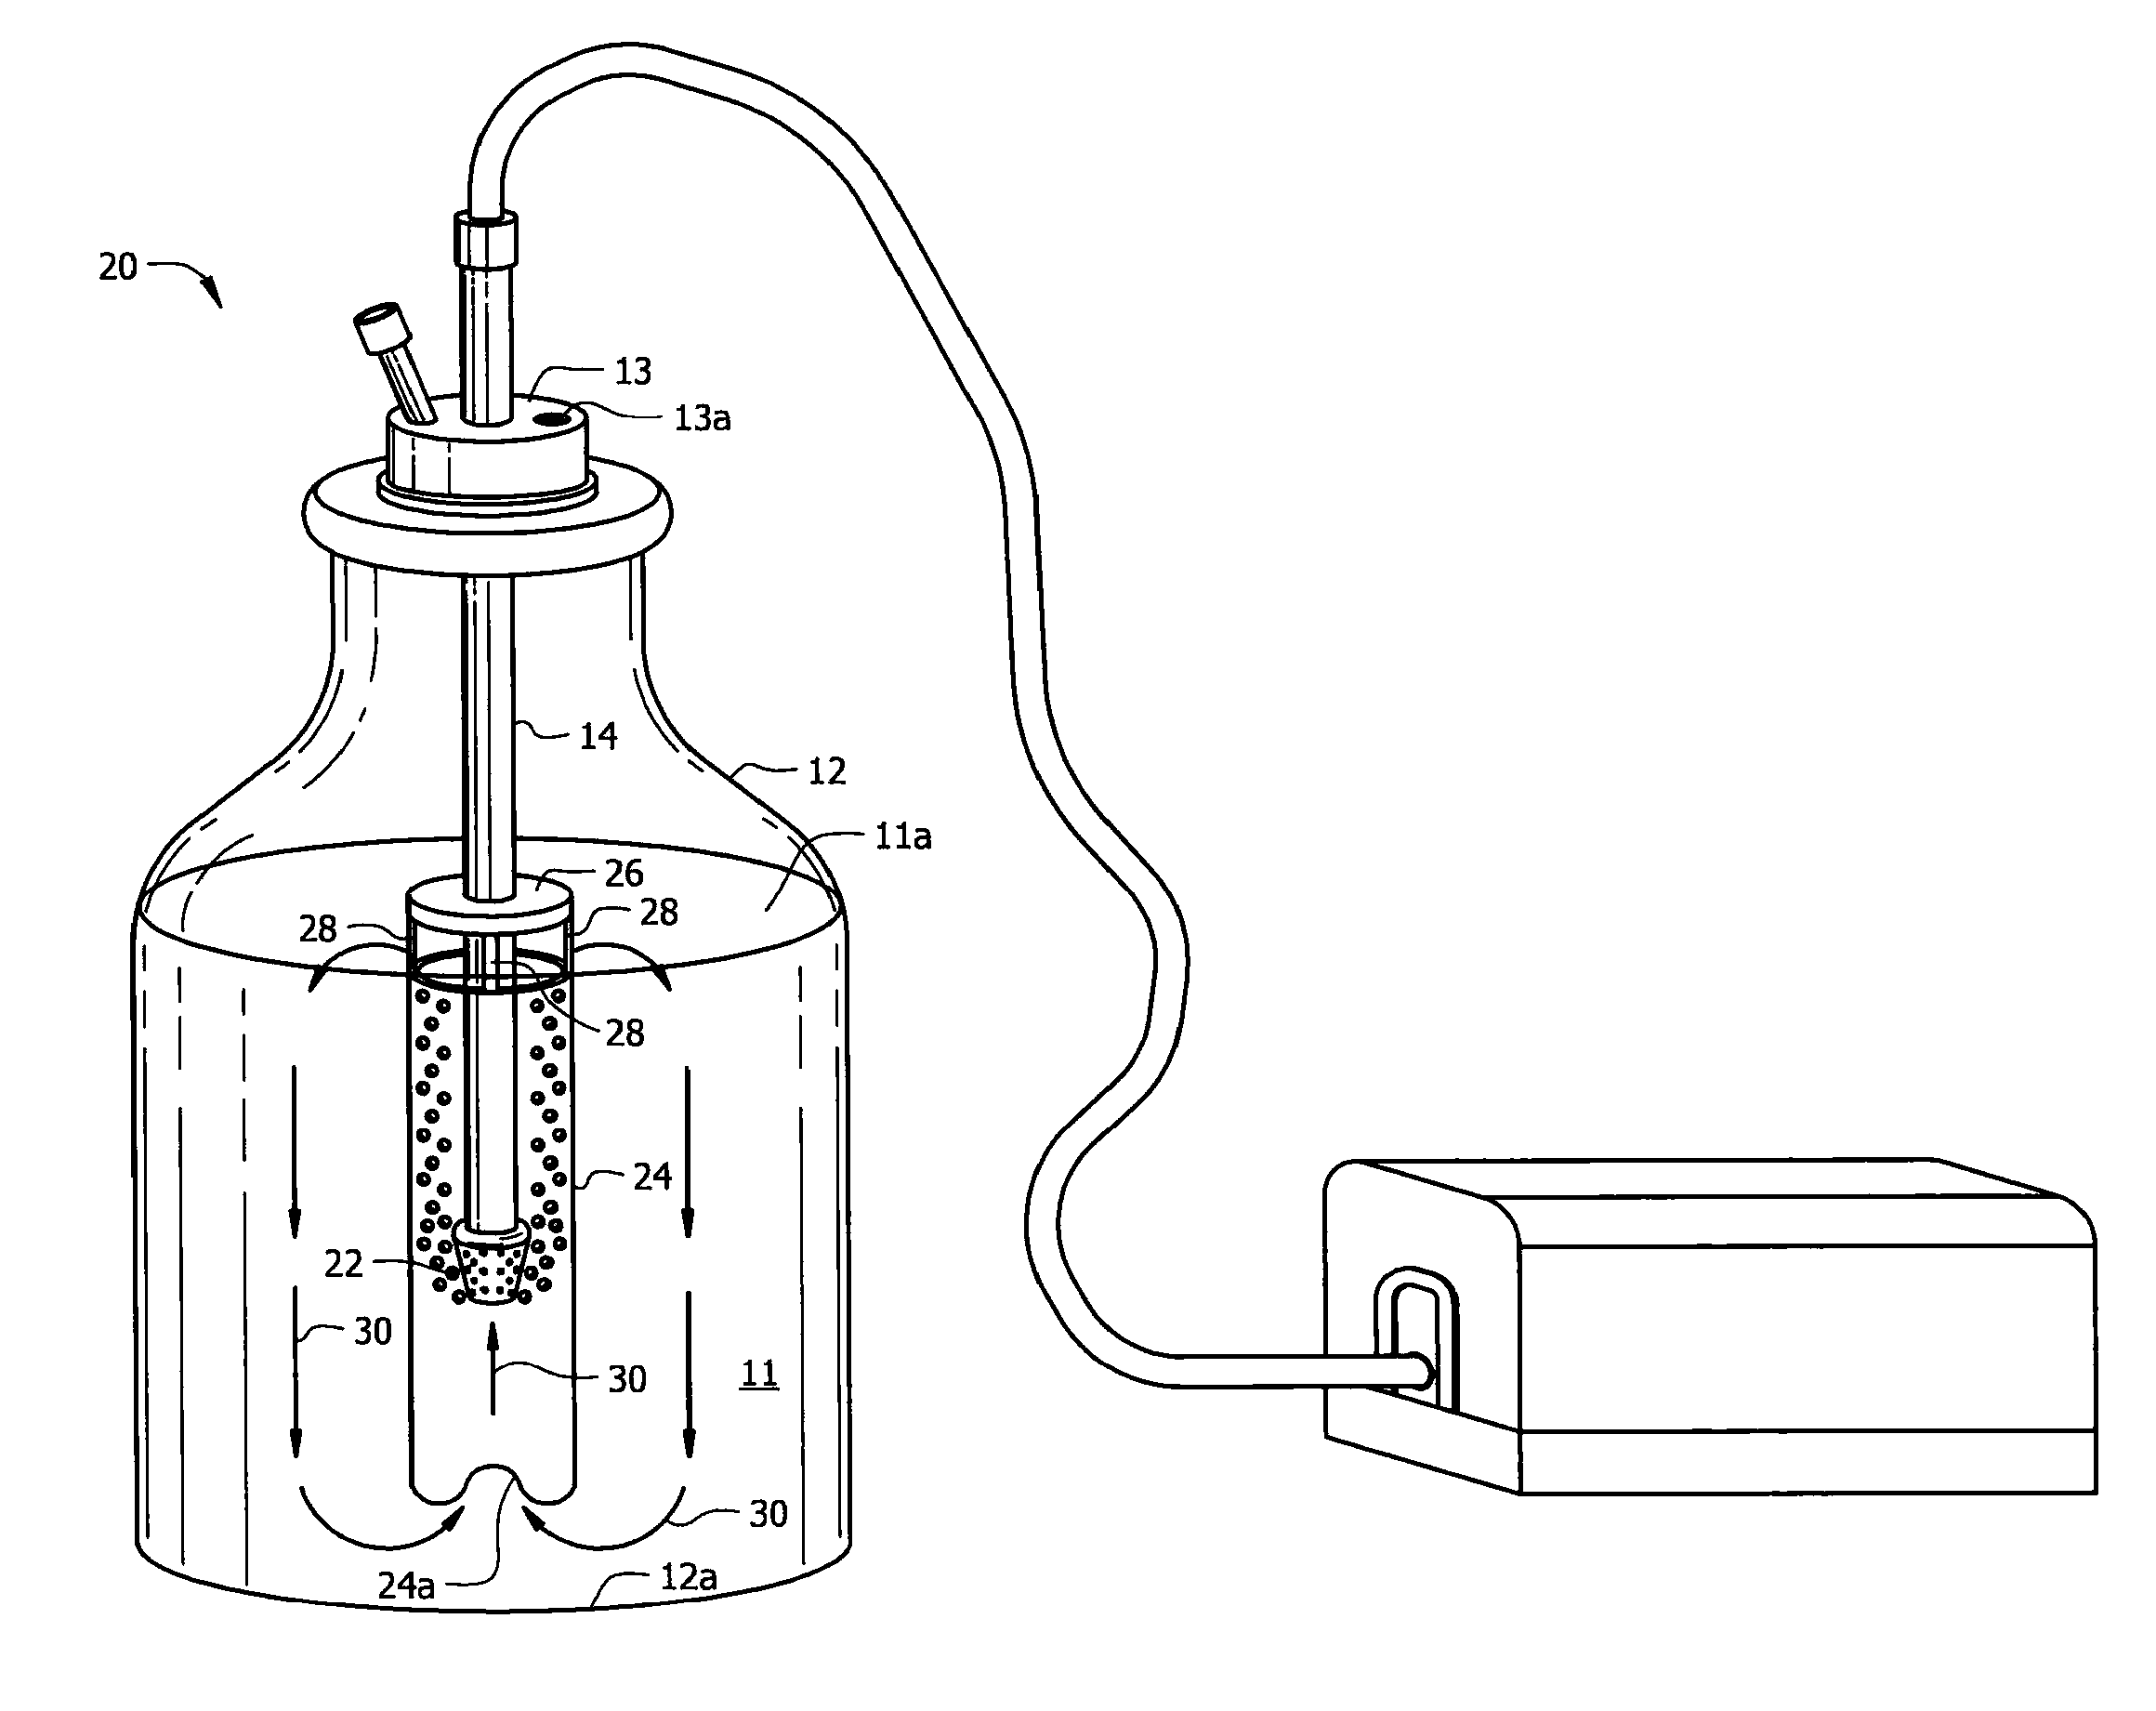 Toroidal convection mixing device